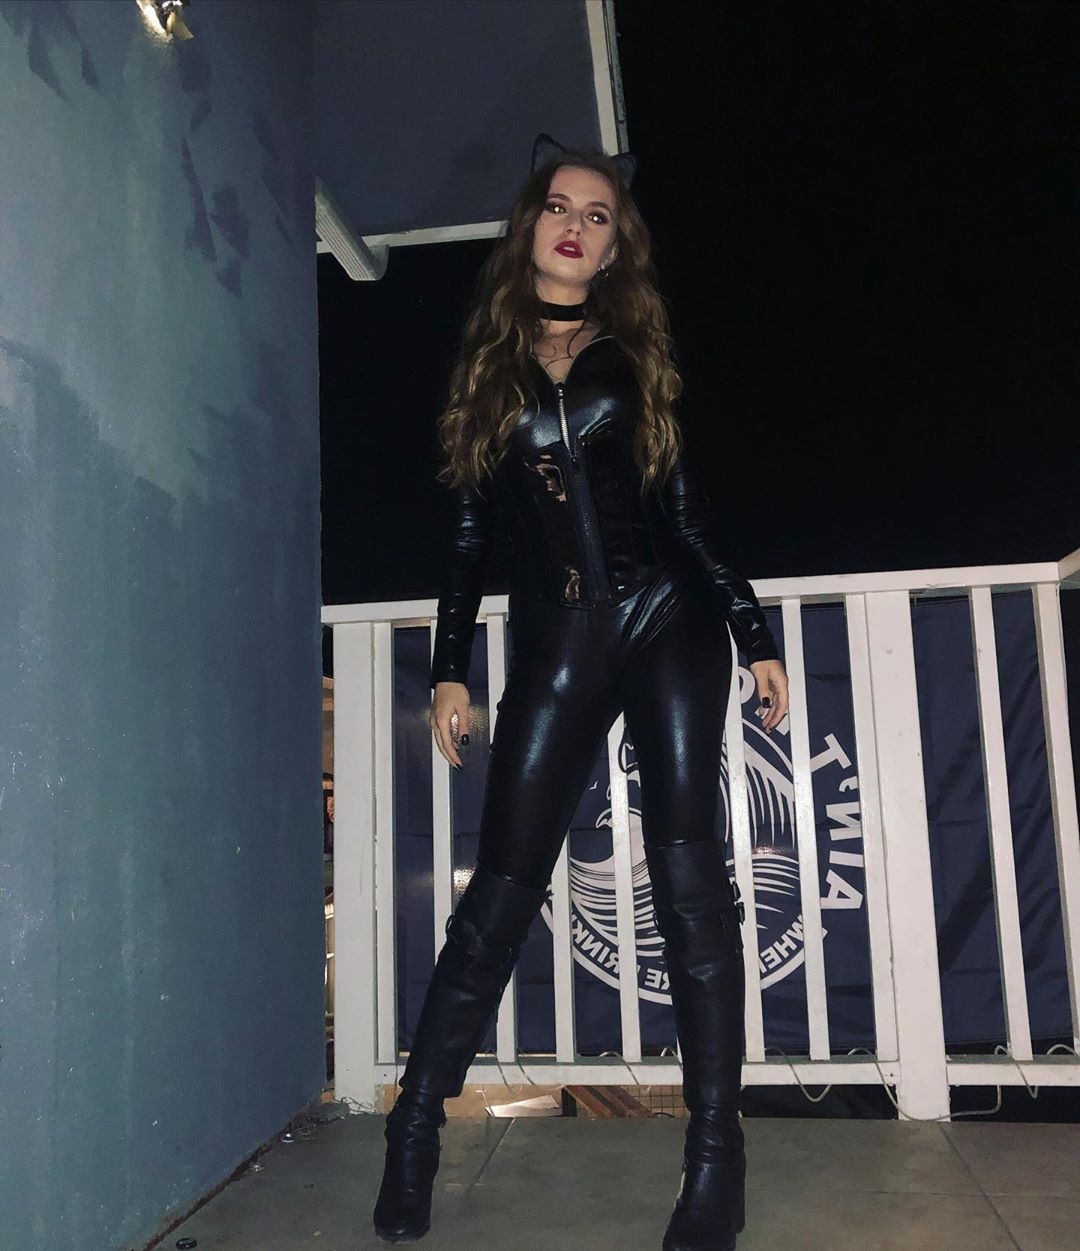 Darthlexii As Catwoma